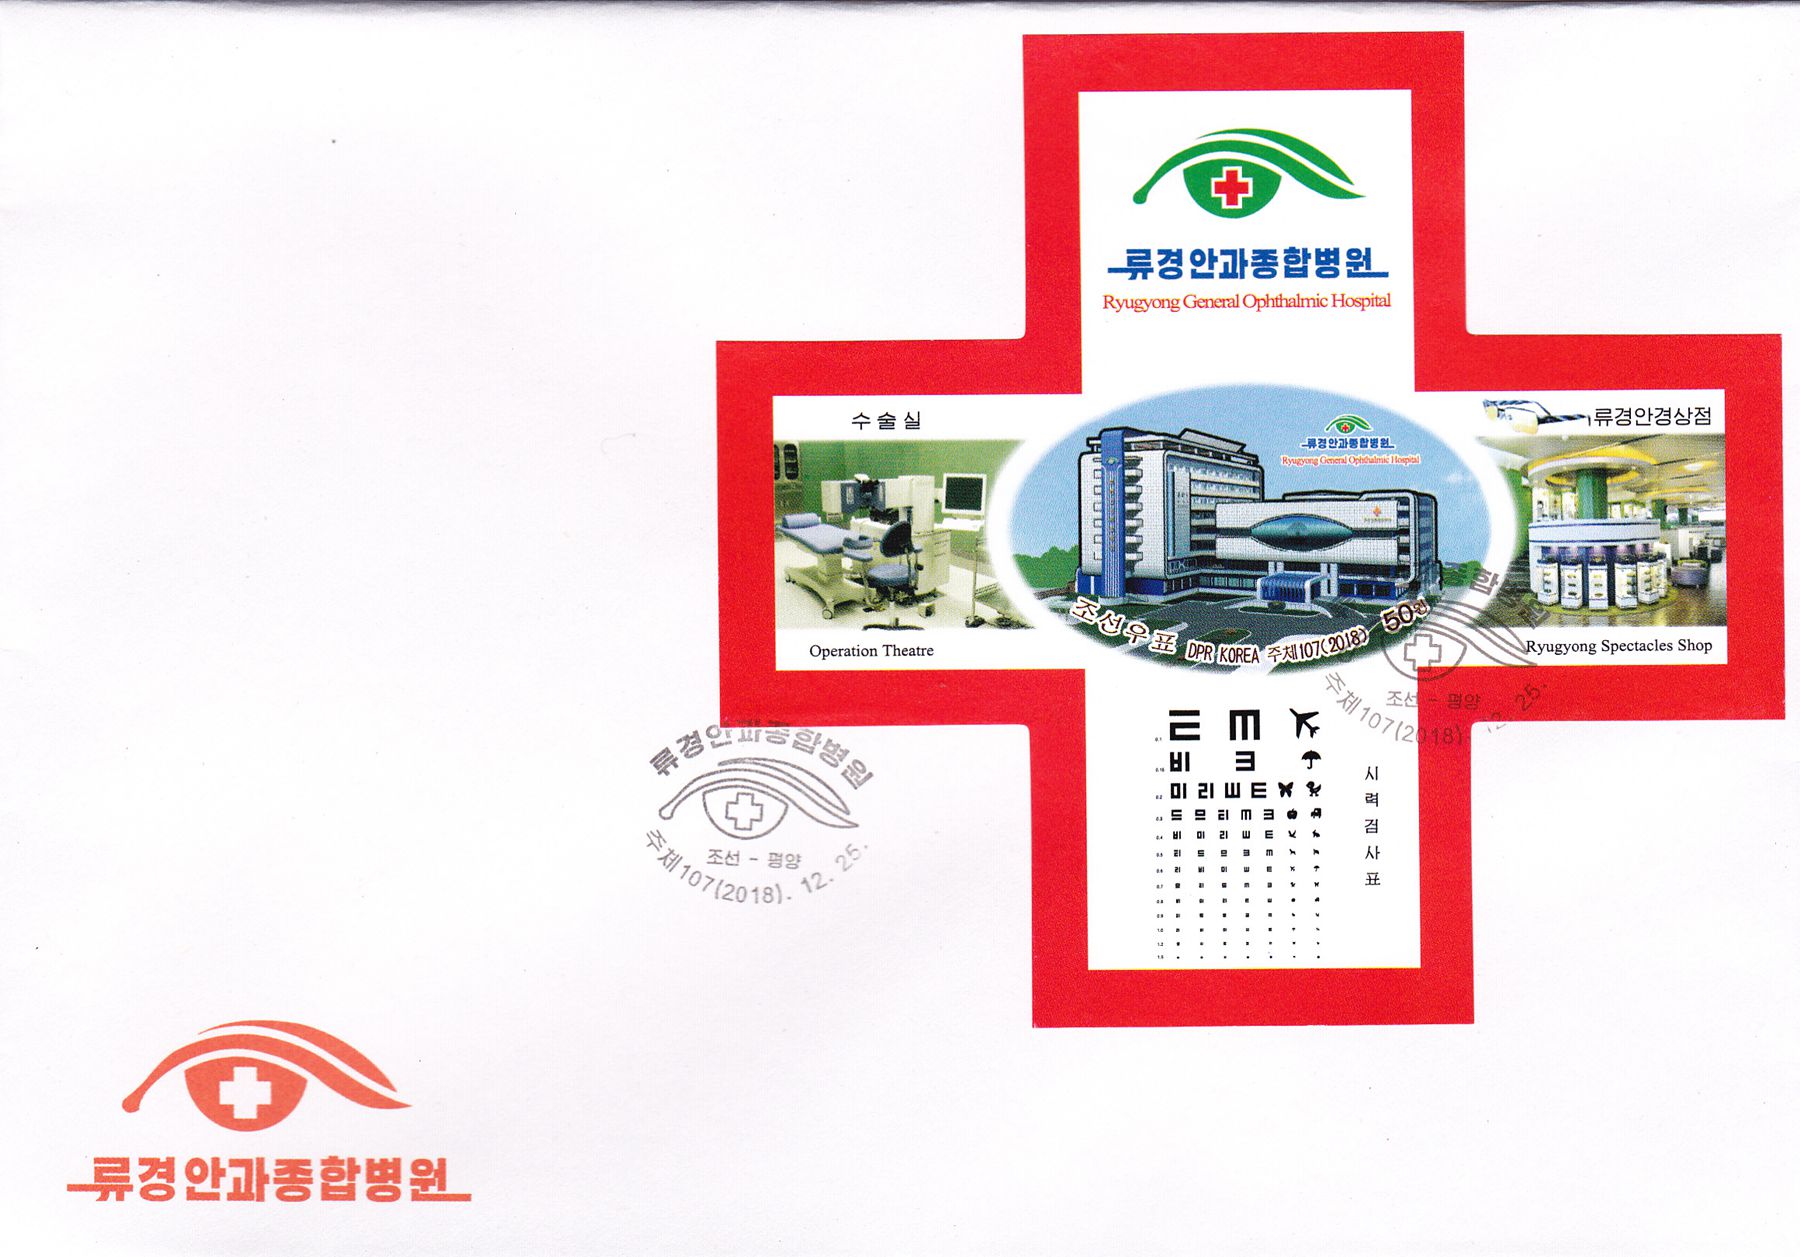 L9713, Korea "Ryugyong General Ophthalmic Hospital", First Day Cover, 2018 Imperforate